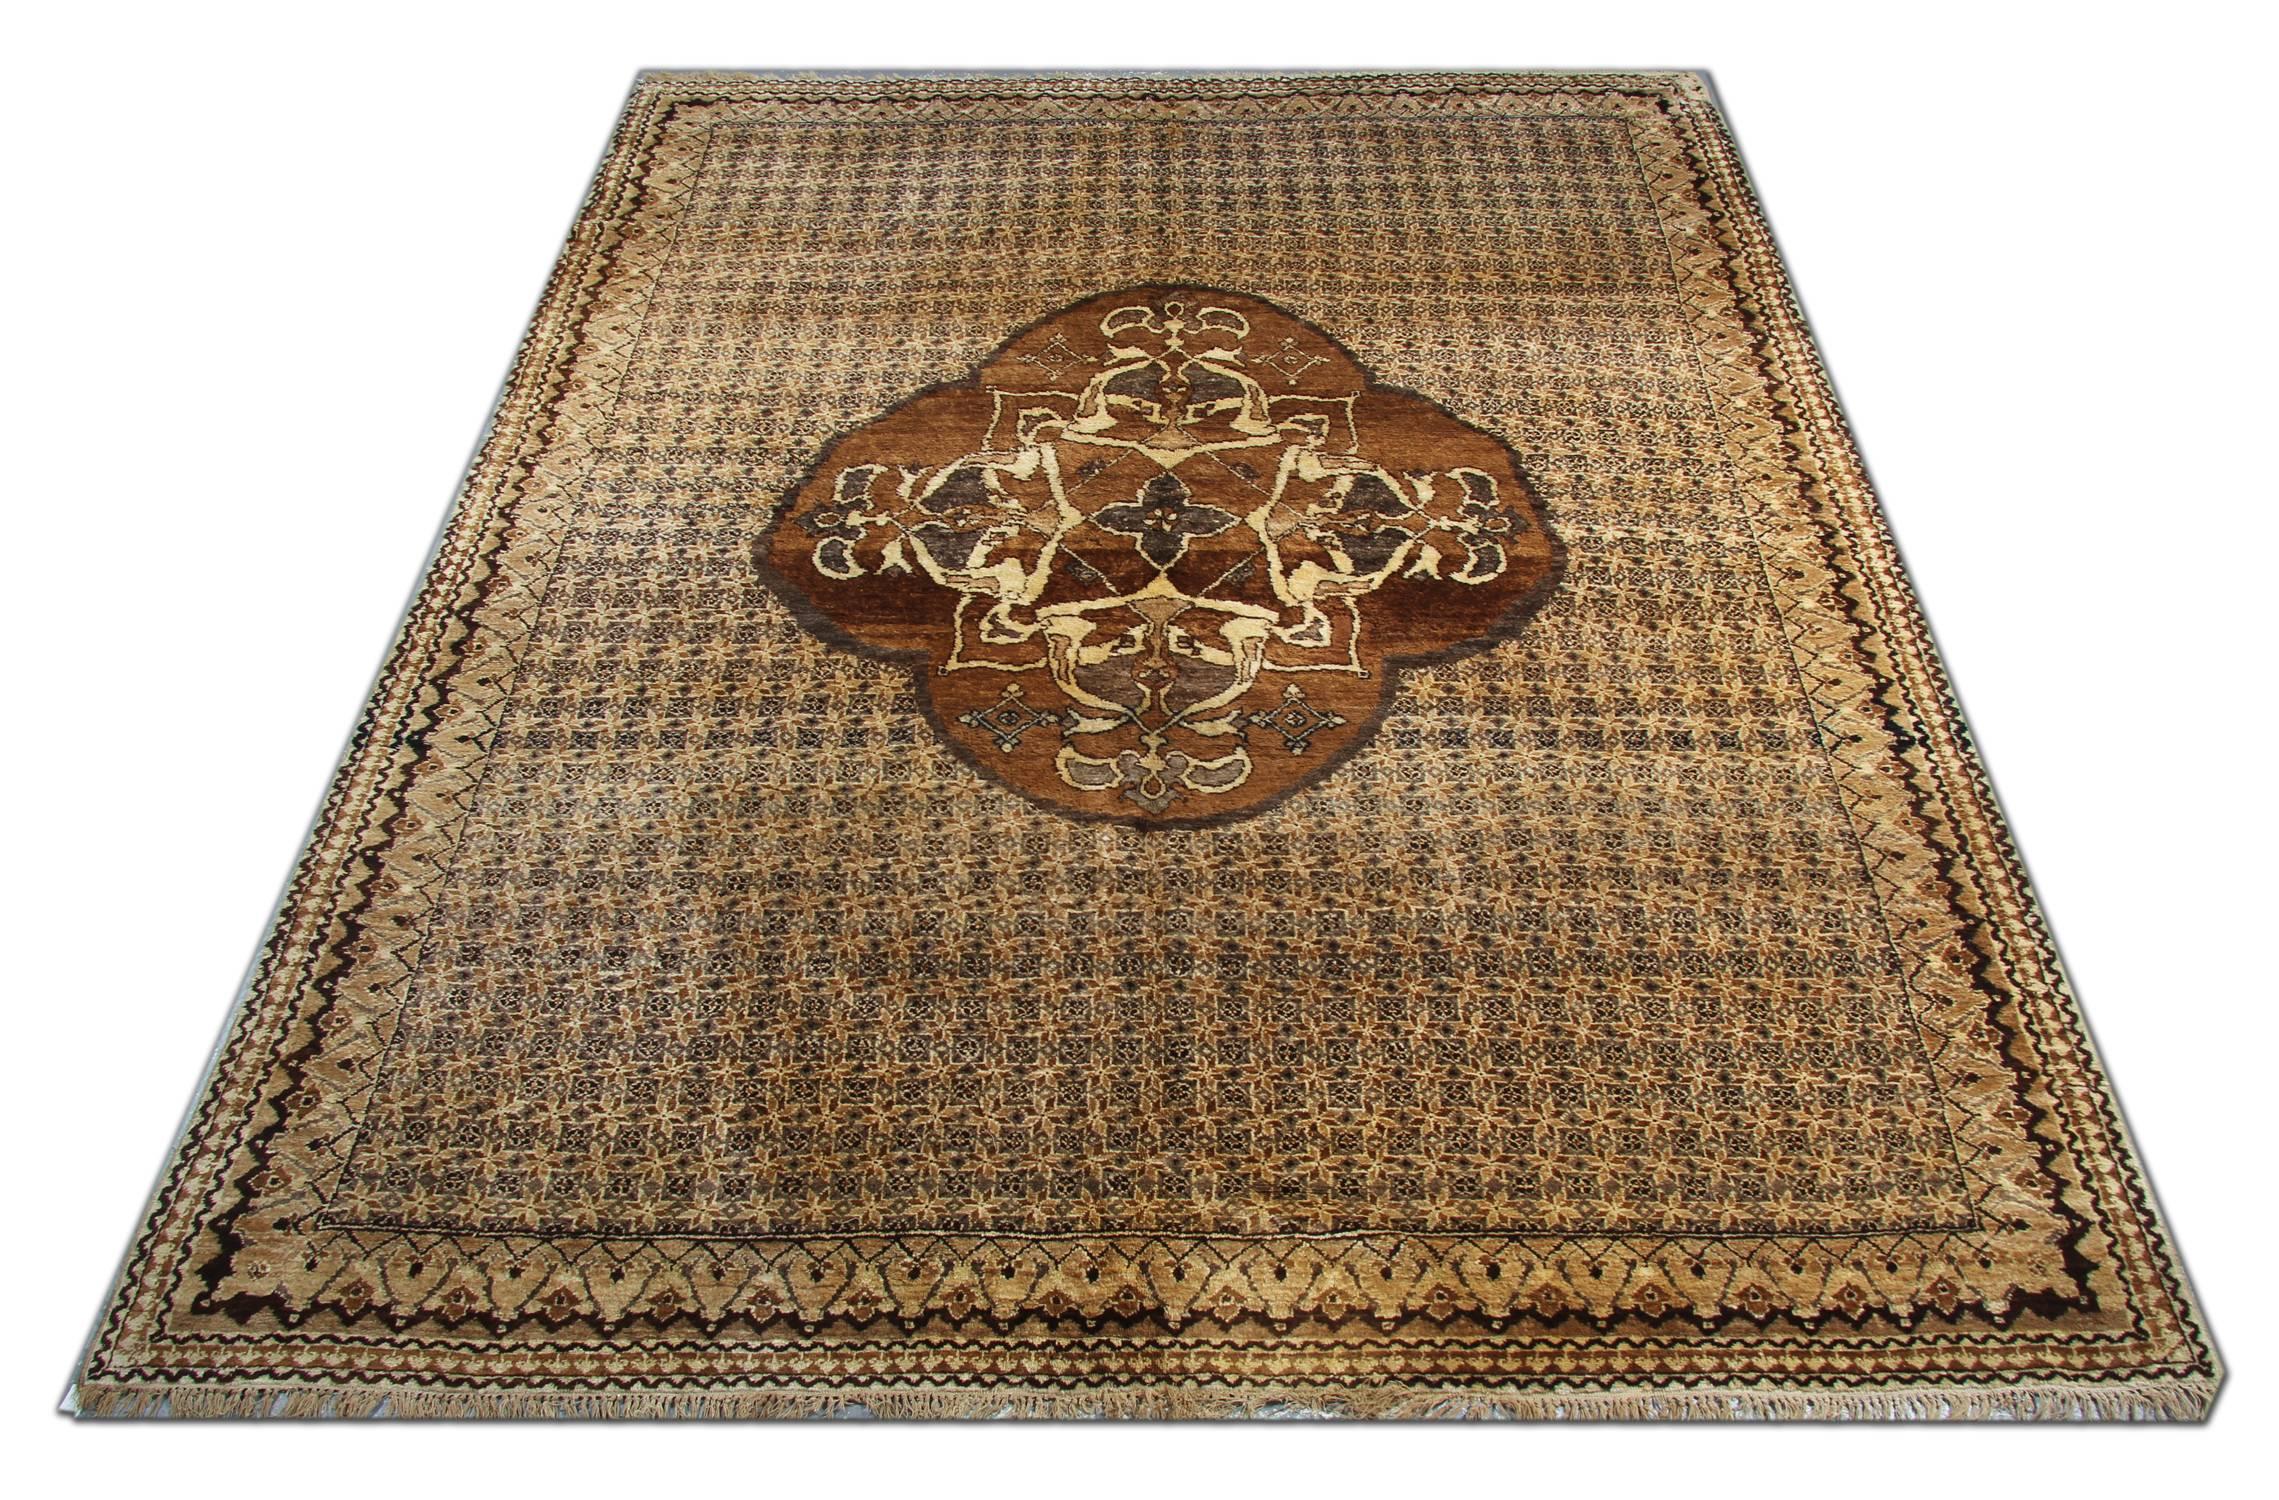 This handmade carpet antique rug is a Turkish brown rug with central medallion and lights brown background color. These luxury rugs would complement your home as floor rugs. These large rugs look beautiful and would stand out as living room rugs and